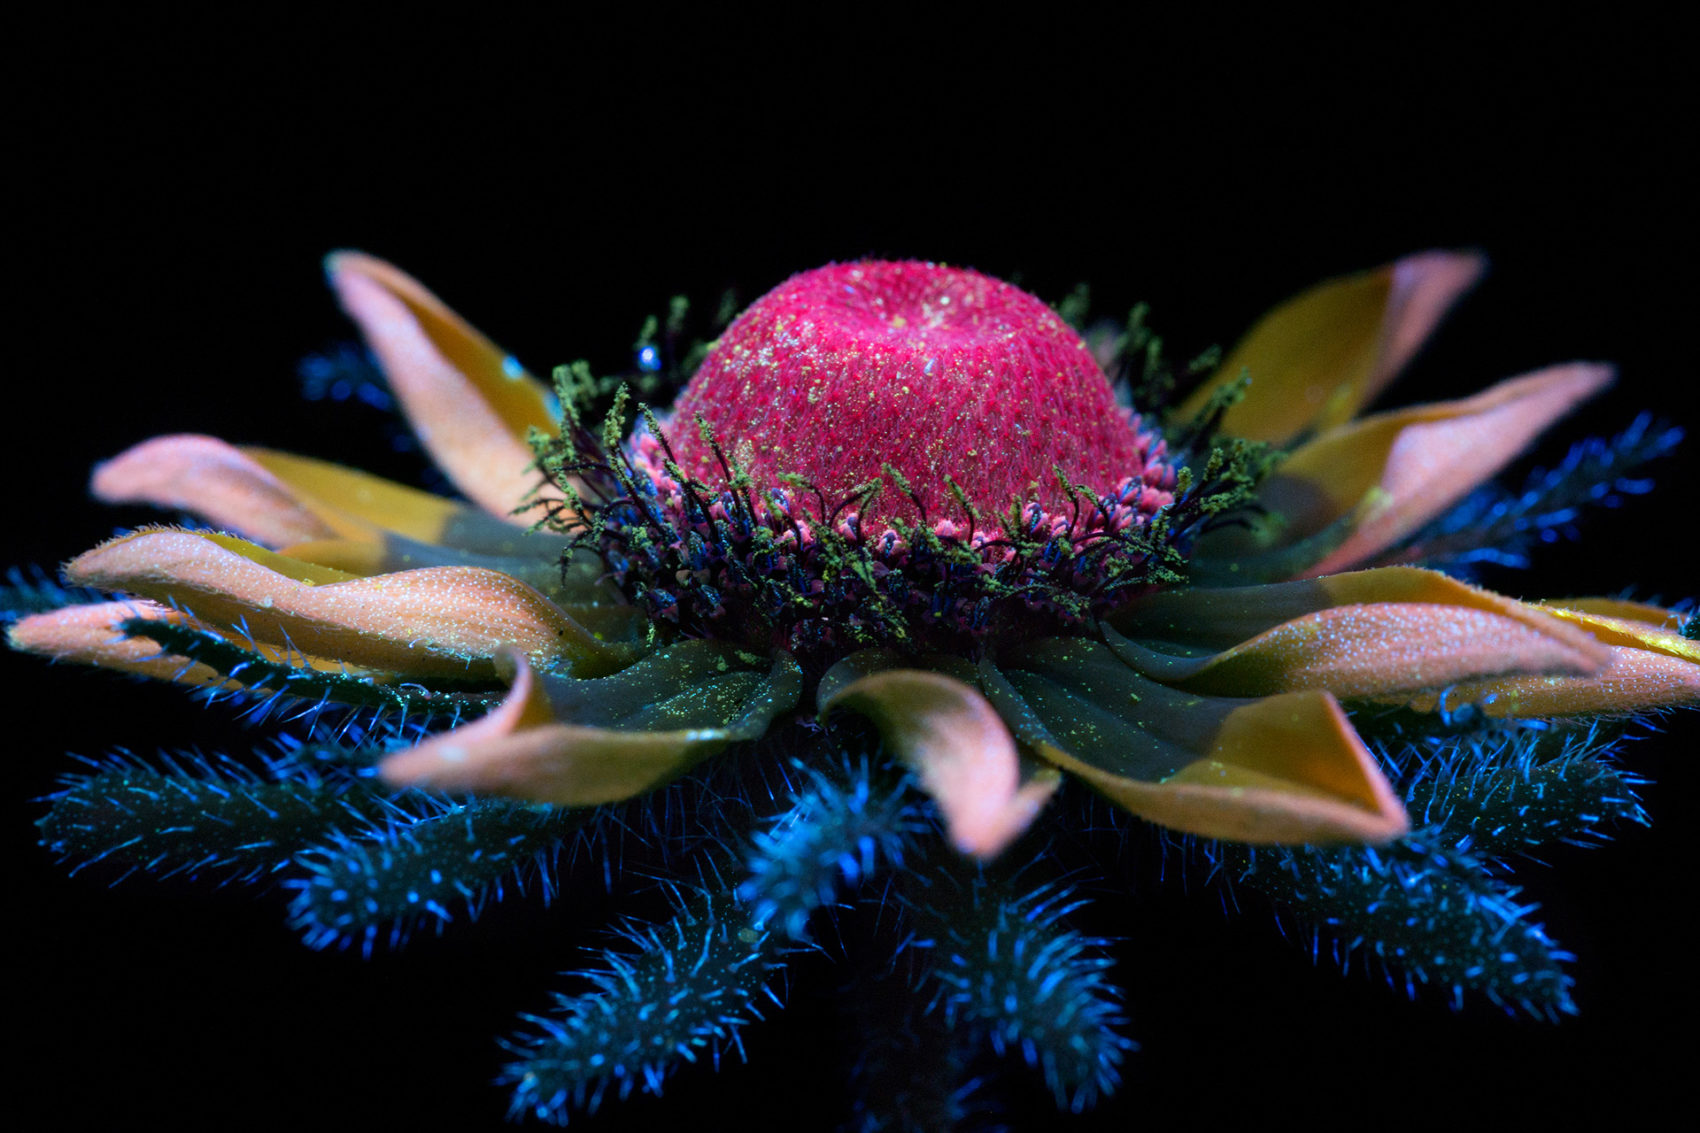 New Sparkling Blooms Photographed with Ultraviolet-Induced Visible Fluorescence by Craig Burrows